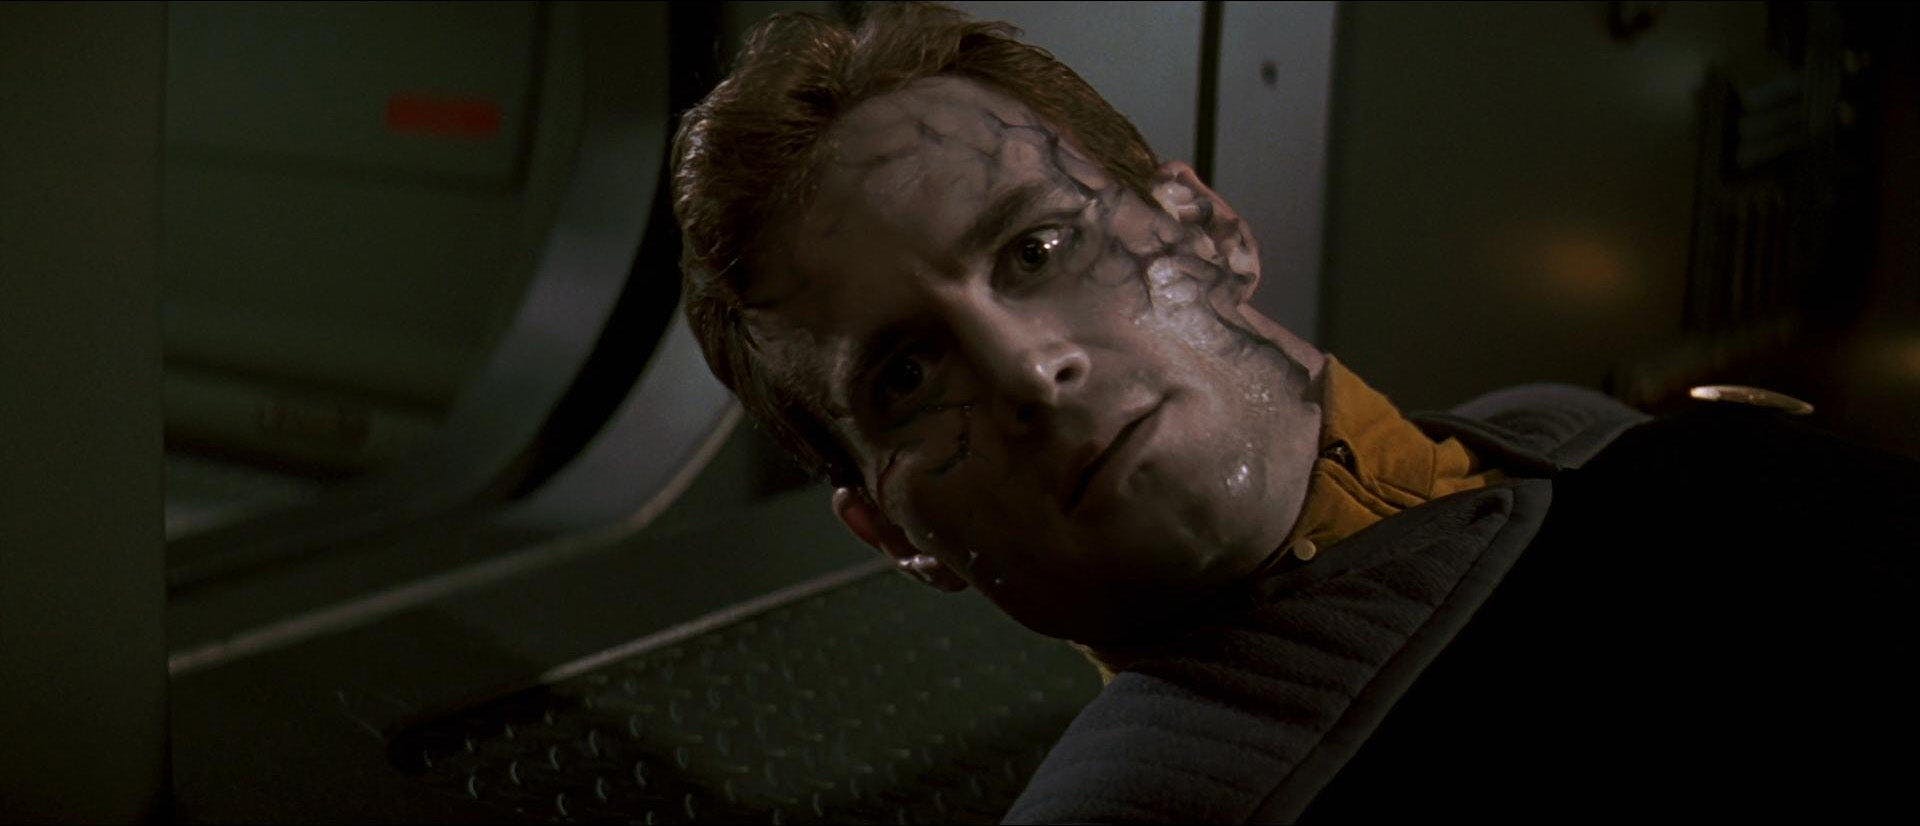 The Borg strips a Starfleet officer of his humanity in Star Trek: First Contact